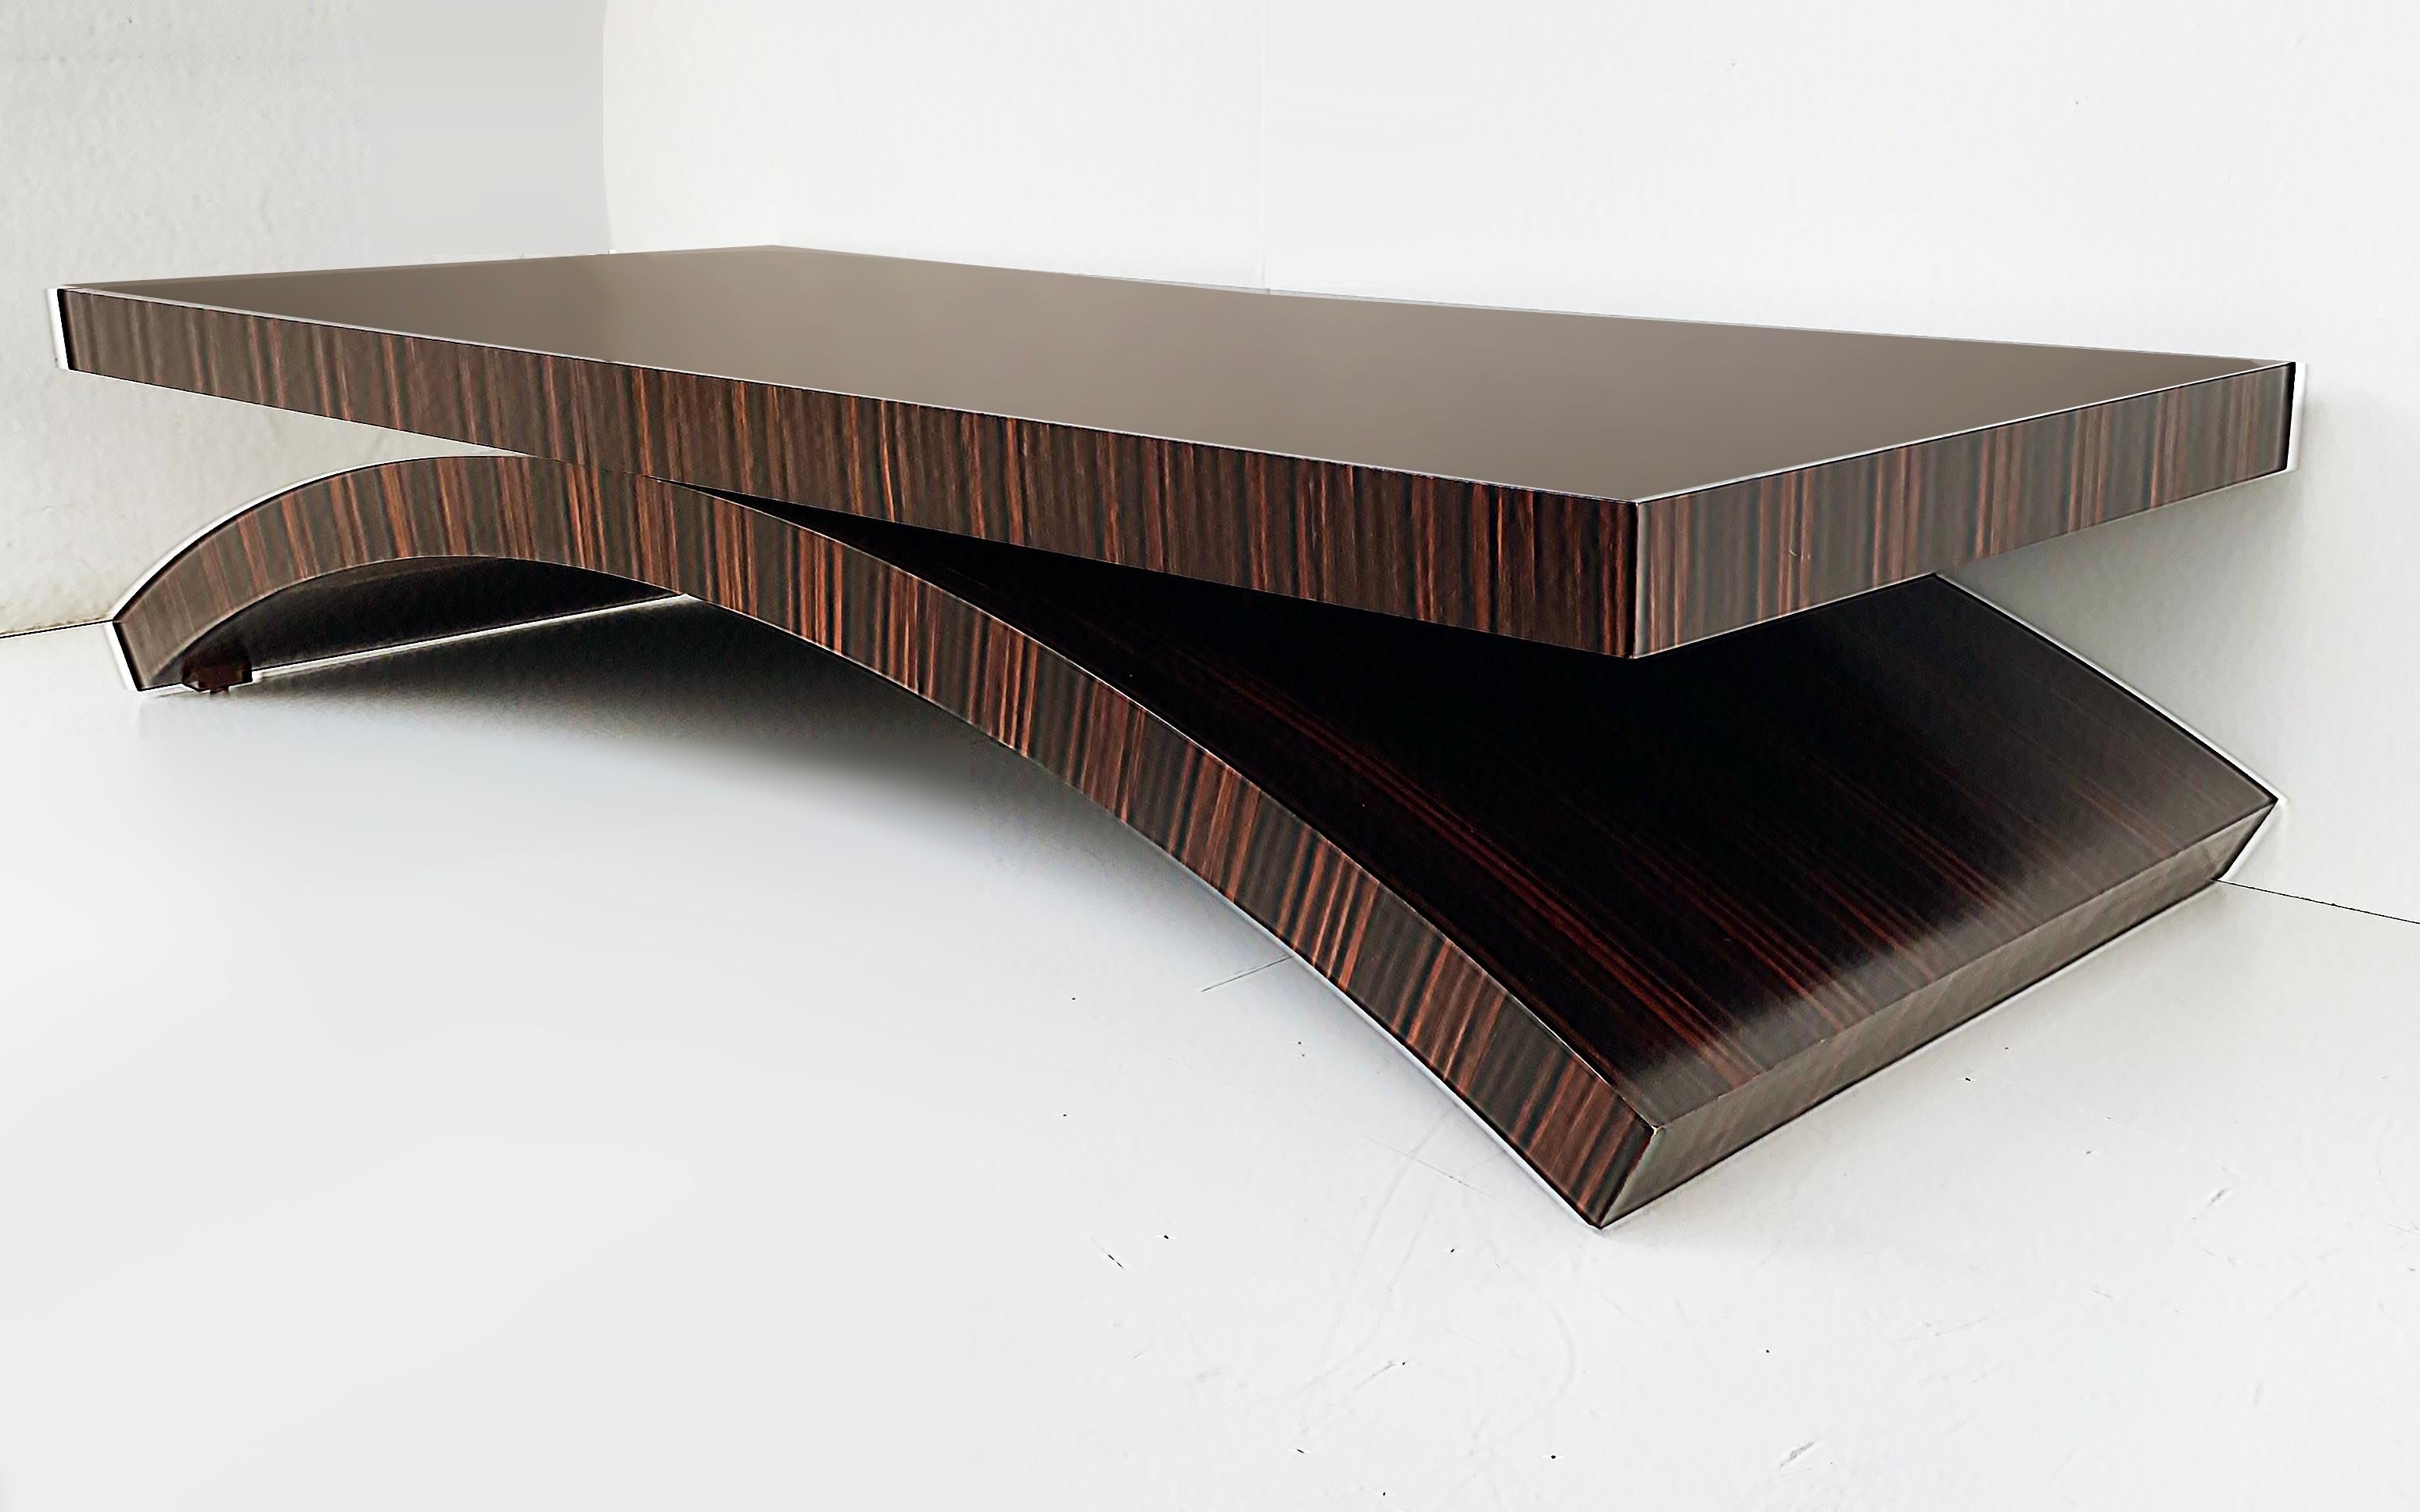 Michael Vanderbyl Boiler Macassar Ebony Arch Coffee Table, Large 

Offered for sale is a sleek contemporary coffee table designed by Michael Vanderbyl for Boiler Domicile. This Arch table is the overscaled large version that blends rich aesthetic